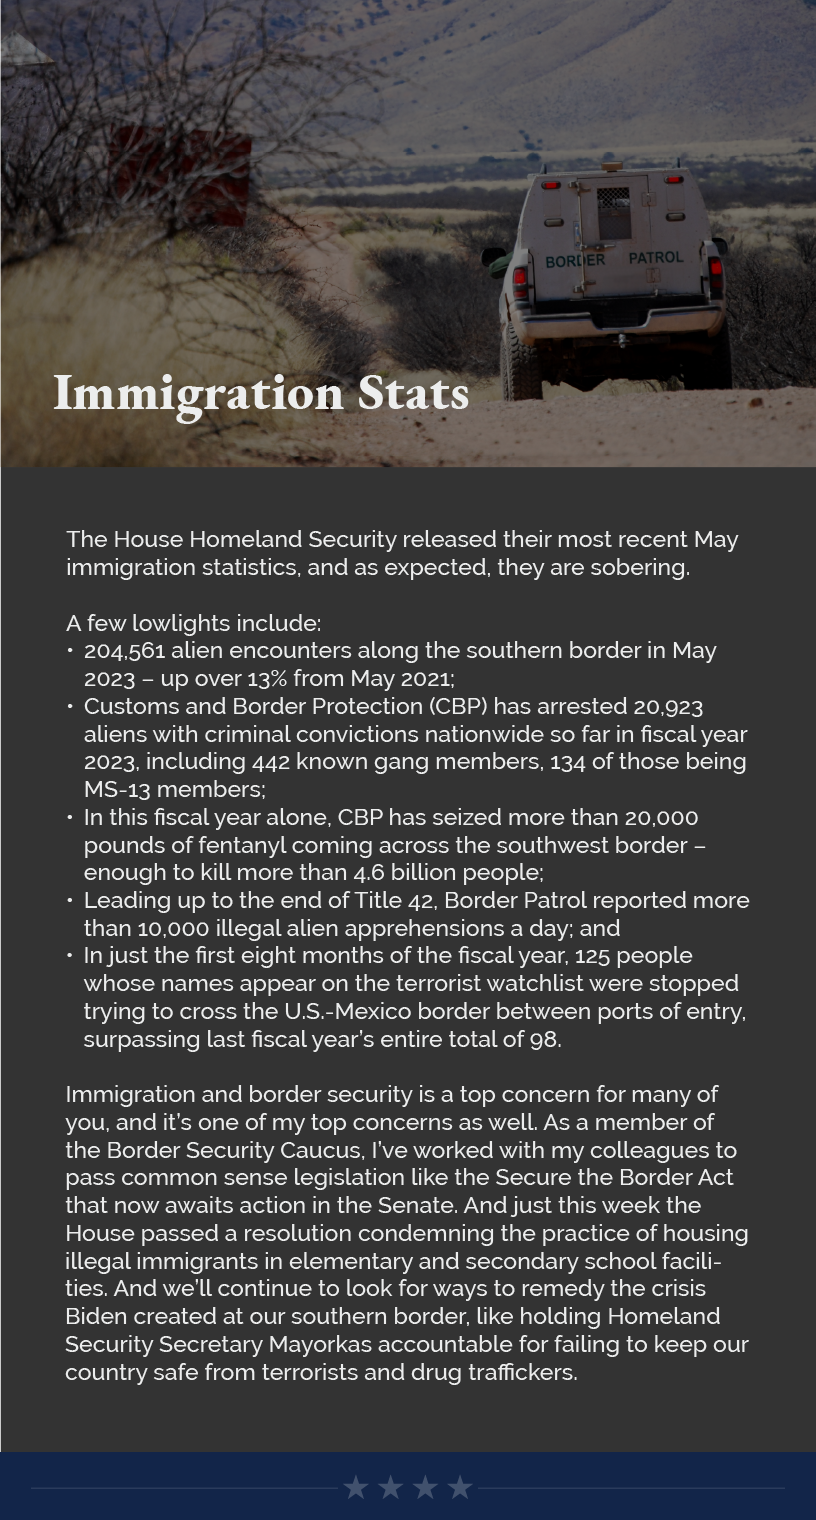 Headline: Immigration Stats.  The House Homeland Security released their most recent May immigration statistics, and as expected, they are sobering.  A few lowlights include: 204,561 alien encounters along the southern border in May 2023 – up over 13% from May 2021; Customs and Border Protection (CBP) has arrested 20,923 aliens with criminal convictions nationwide so far in fiscal year 2023, including 442 known gang members, 134 of those being MS-13 members; In this fiscal year alone, CBP has seized more than 20,000 pounds of fentanyl coming across the southwest border – enough to kill more than 4.6 billion people; Leading up to the end of Title 42, Border Patrol reported more than 10,000 illegal alien apprehensions a day; and In just the first eight months of the fiscal year, 125 people whose names appear on the terrorist watchlist were stopped trying to cross the U.S.-Mexico border between ports of entry, surpassing last fiscal year’s entire total of 98.  Immigration and border security is a top concern for many of you, and it’s one of my top concerns as well. As a member of the Border Security Caucus, I’ve worked with my colleagues to pass common sense legislation like the Secure the Border Act that now awaits action in the Senate. And last week the House passed a resolution condemning the practice of housing illegal immigrants in elementary and secondary school facilities. And we’ll continue to look for ways to remedy the crisis Biden created at our southern border, like holding Homeland Security Secretary Mayorkas accountable for failing to keep our country safe from terrorists and drug traffickers.